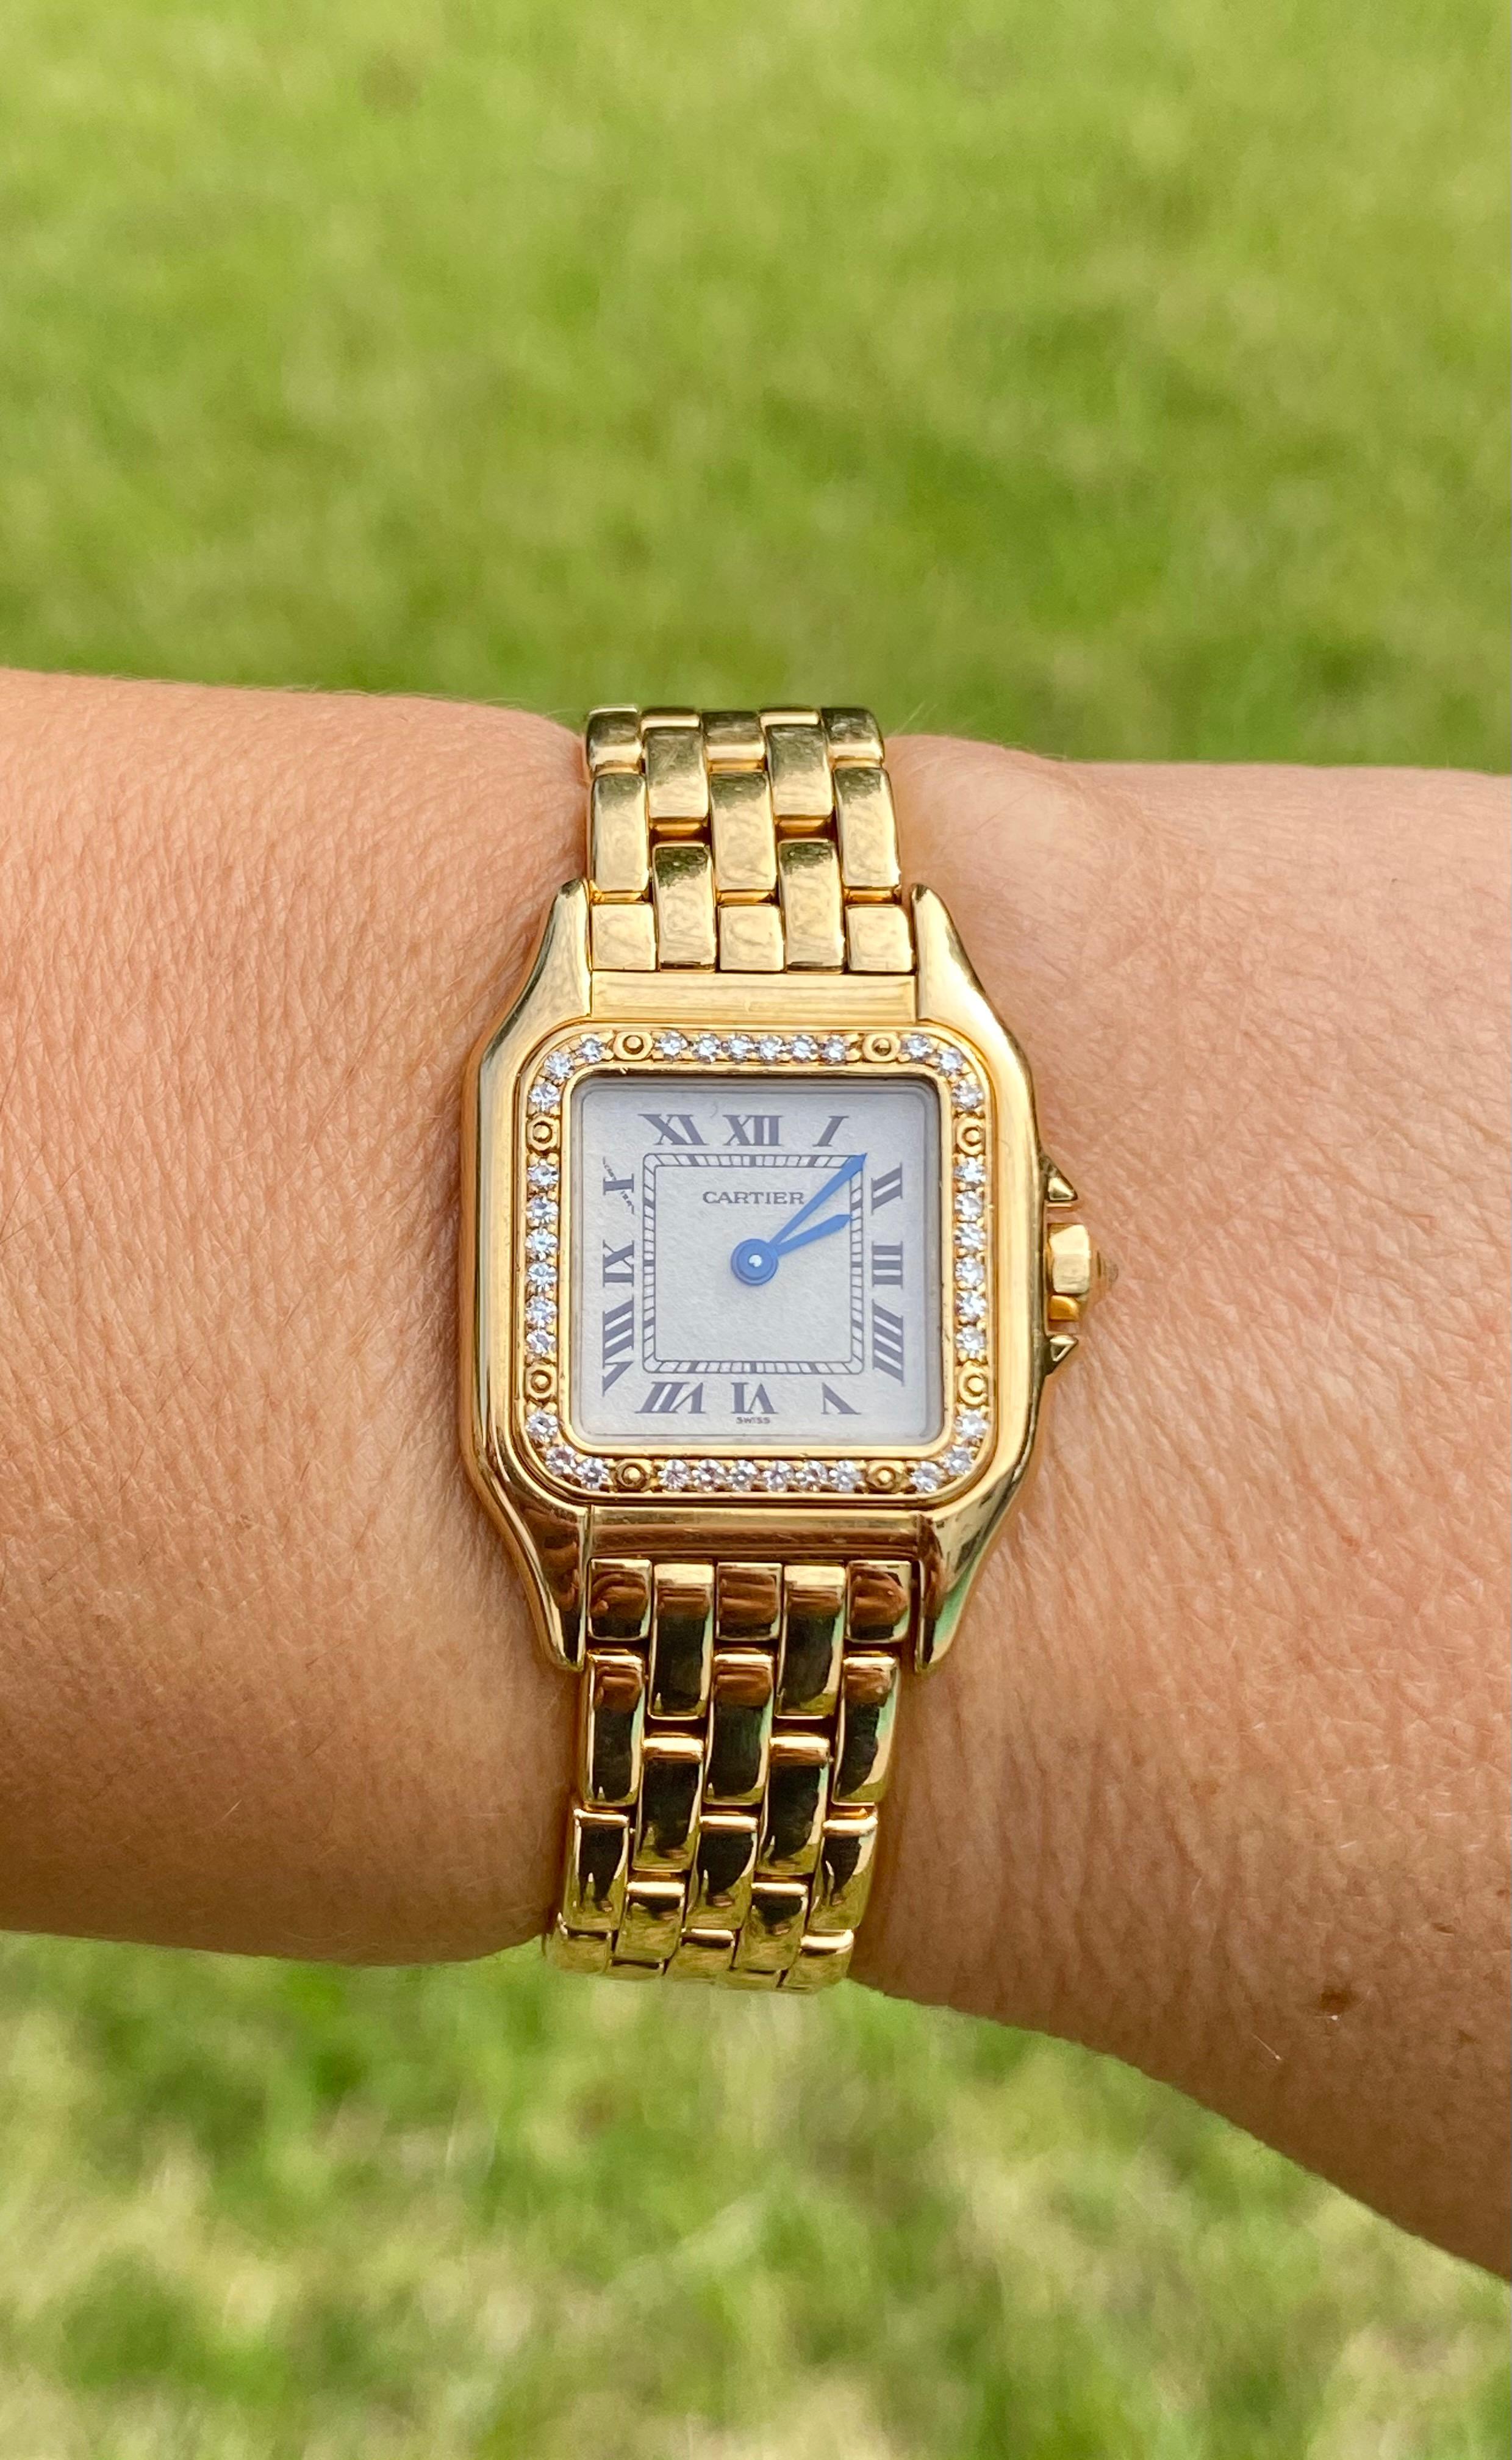 Cartier Panthere Ladies Wristwatch in 18k Gold with Cartier Diamond Bezel 3